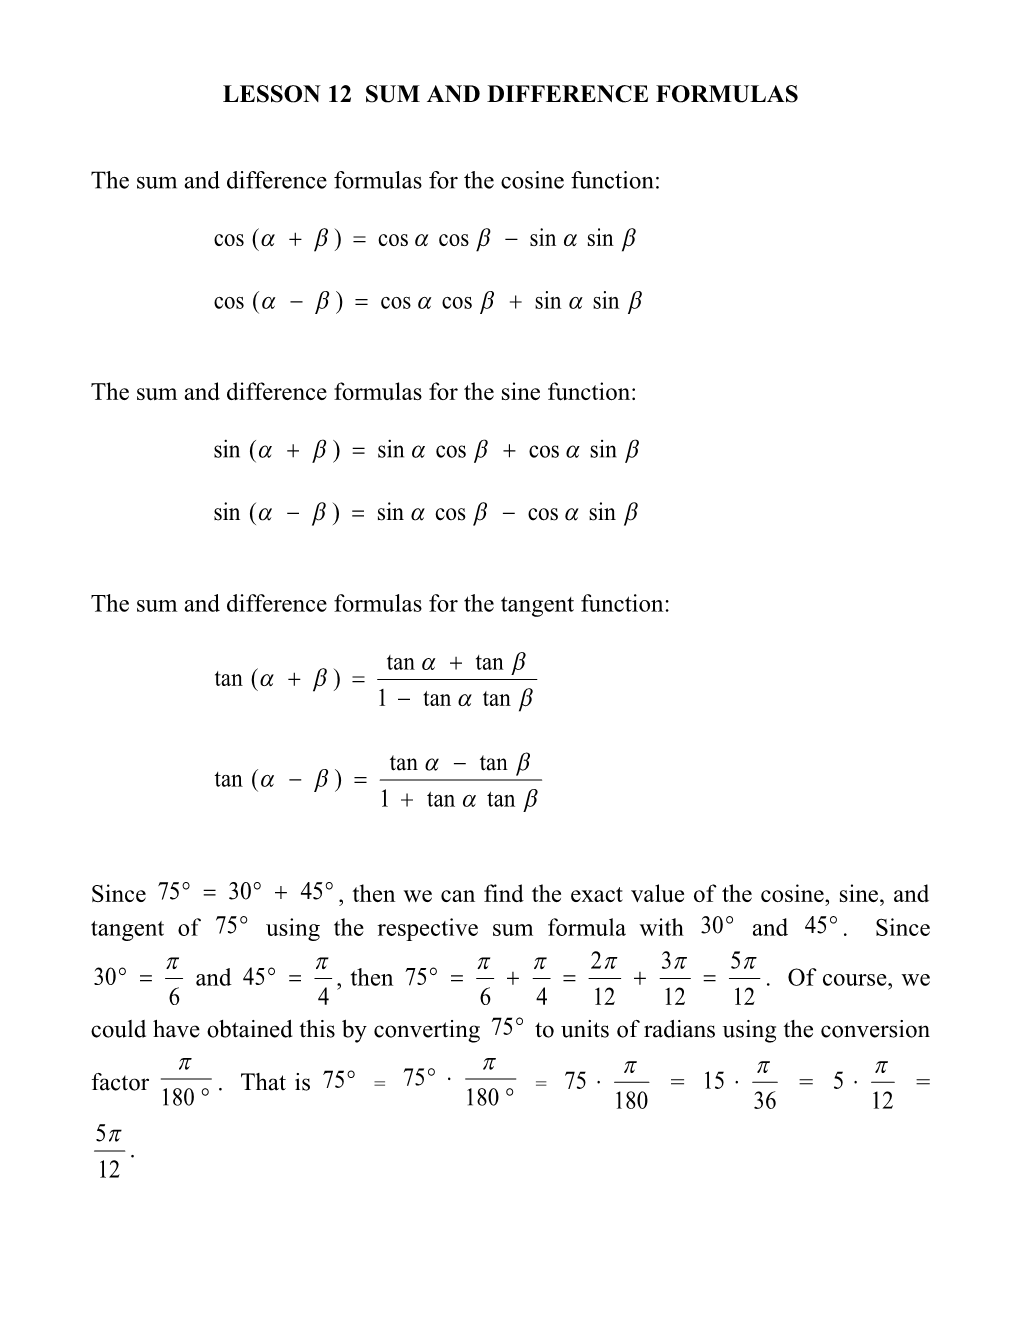 Lesson 12 Sum and Difference Formulas